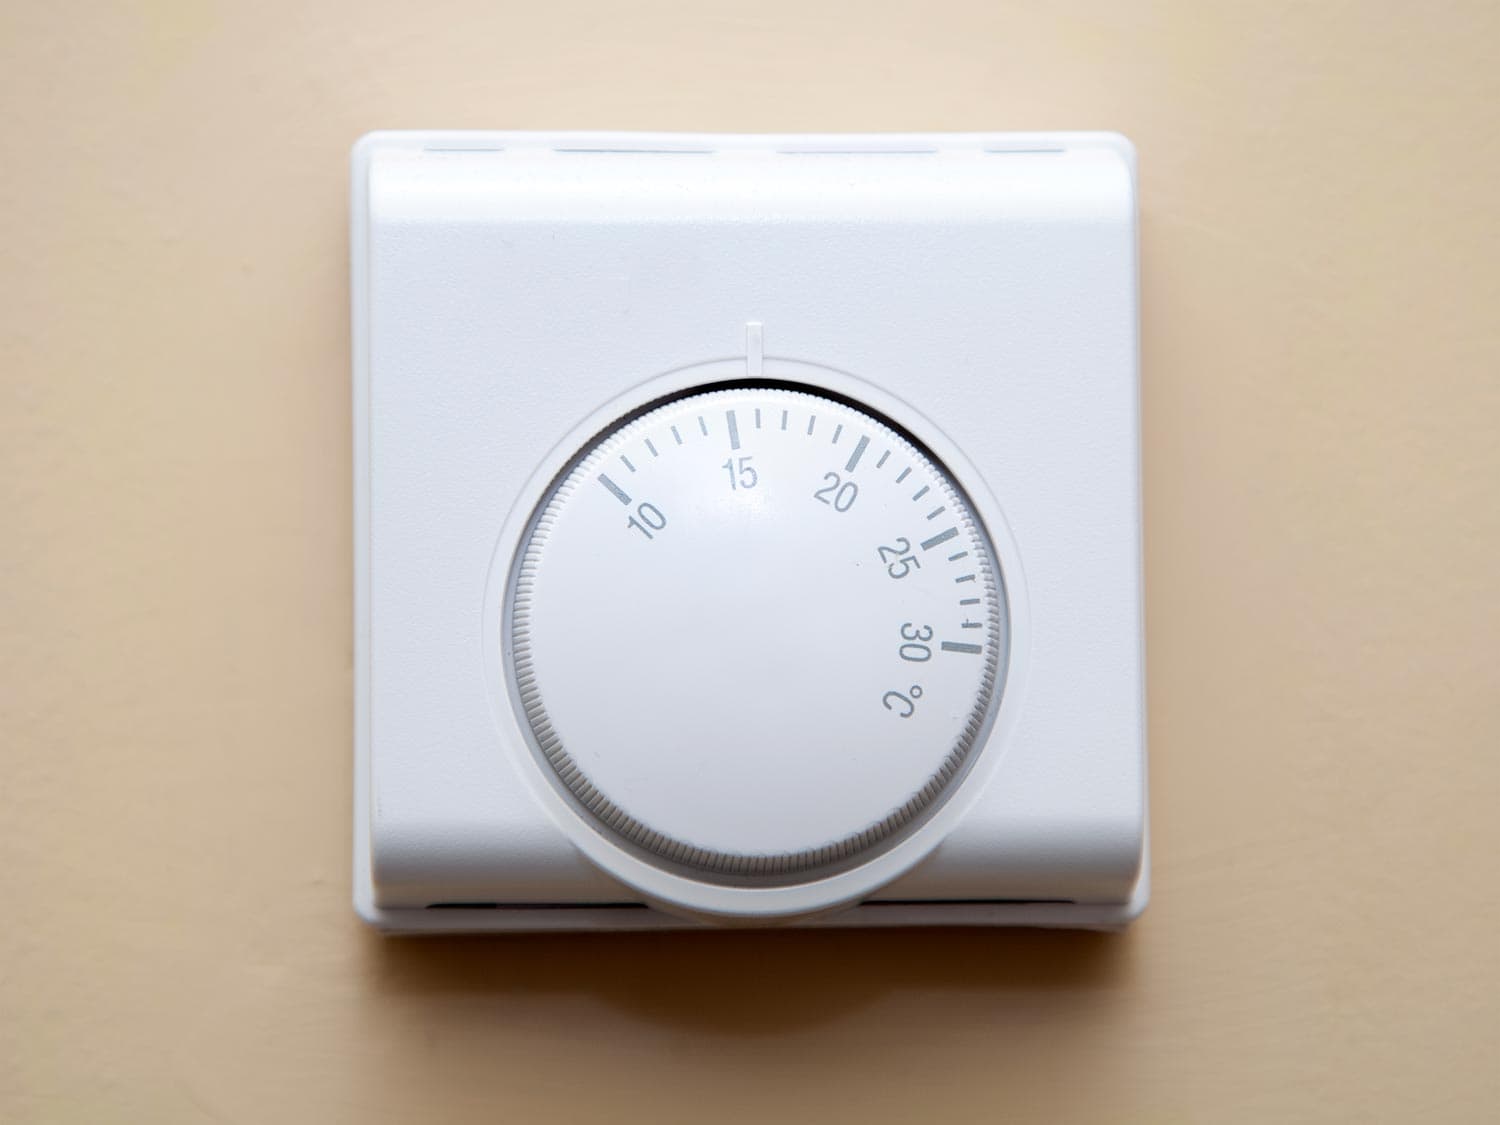 A typical home heating thermostatic control dial on a wall